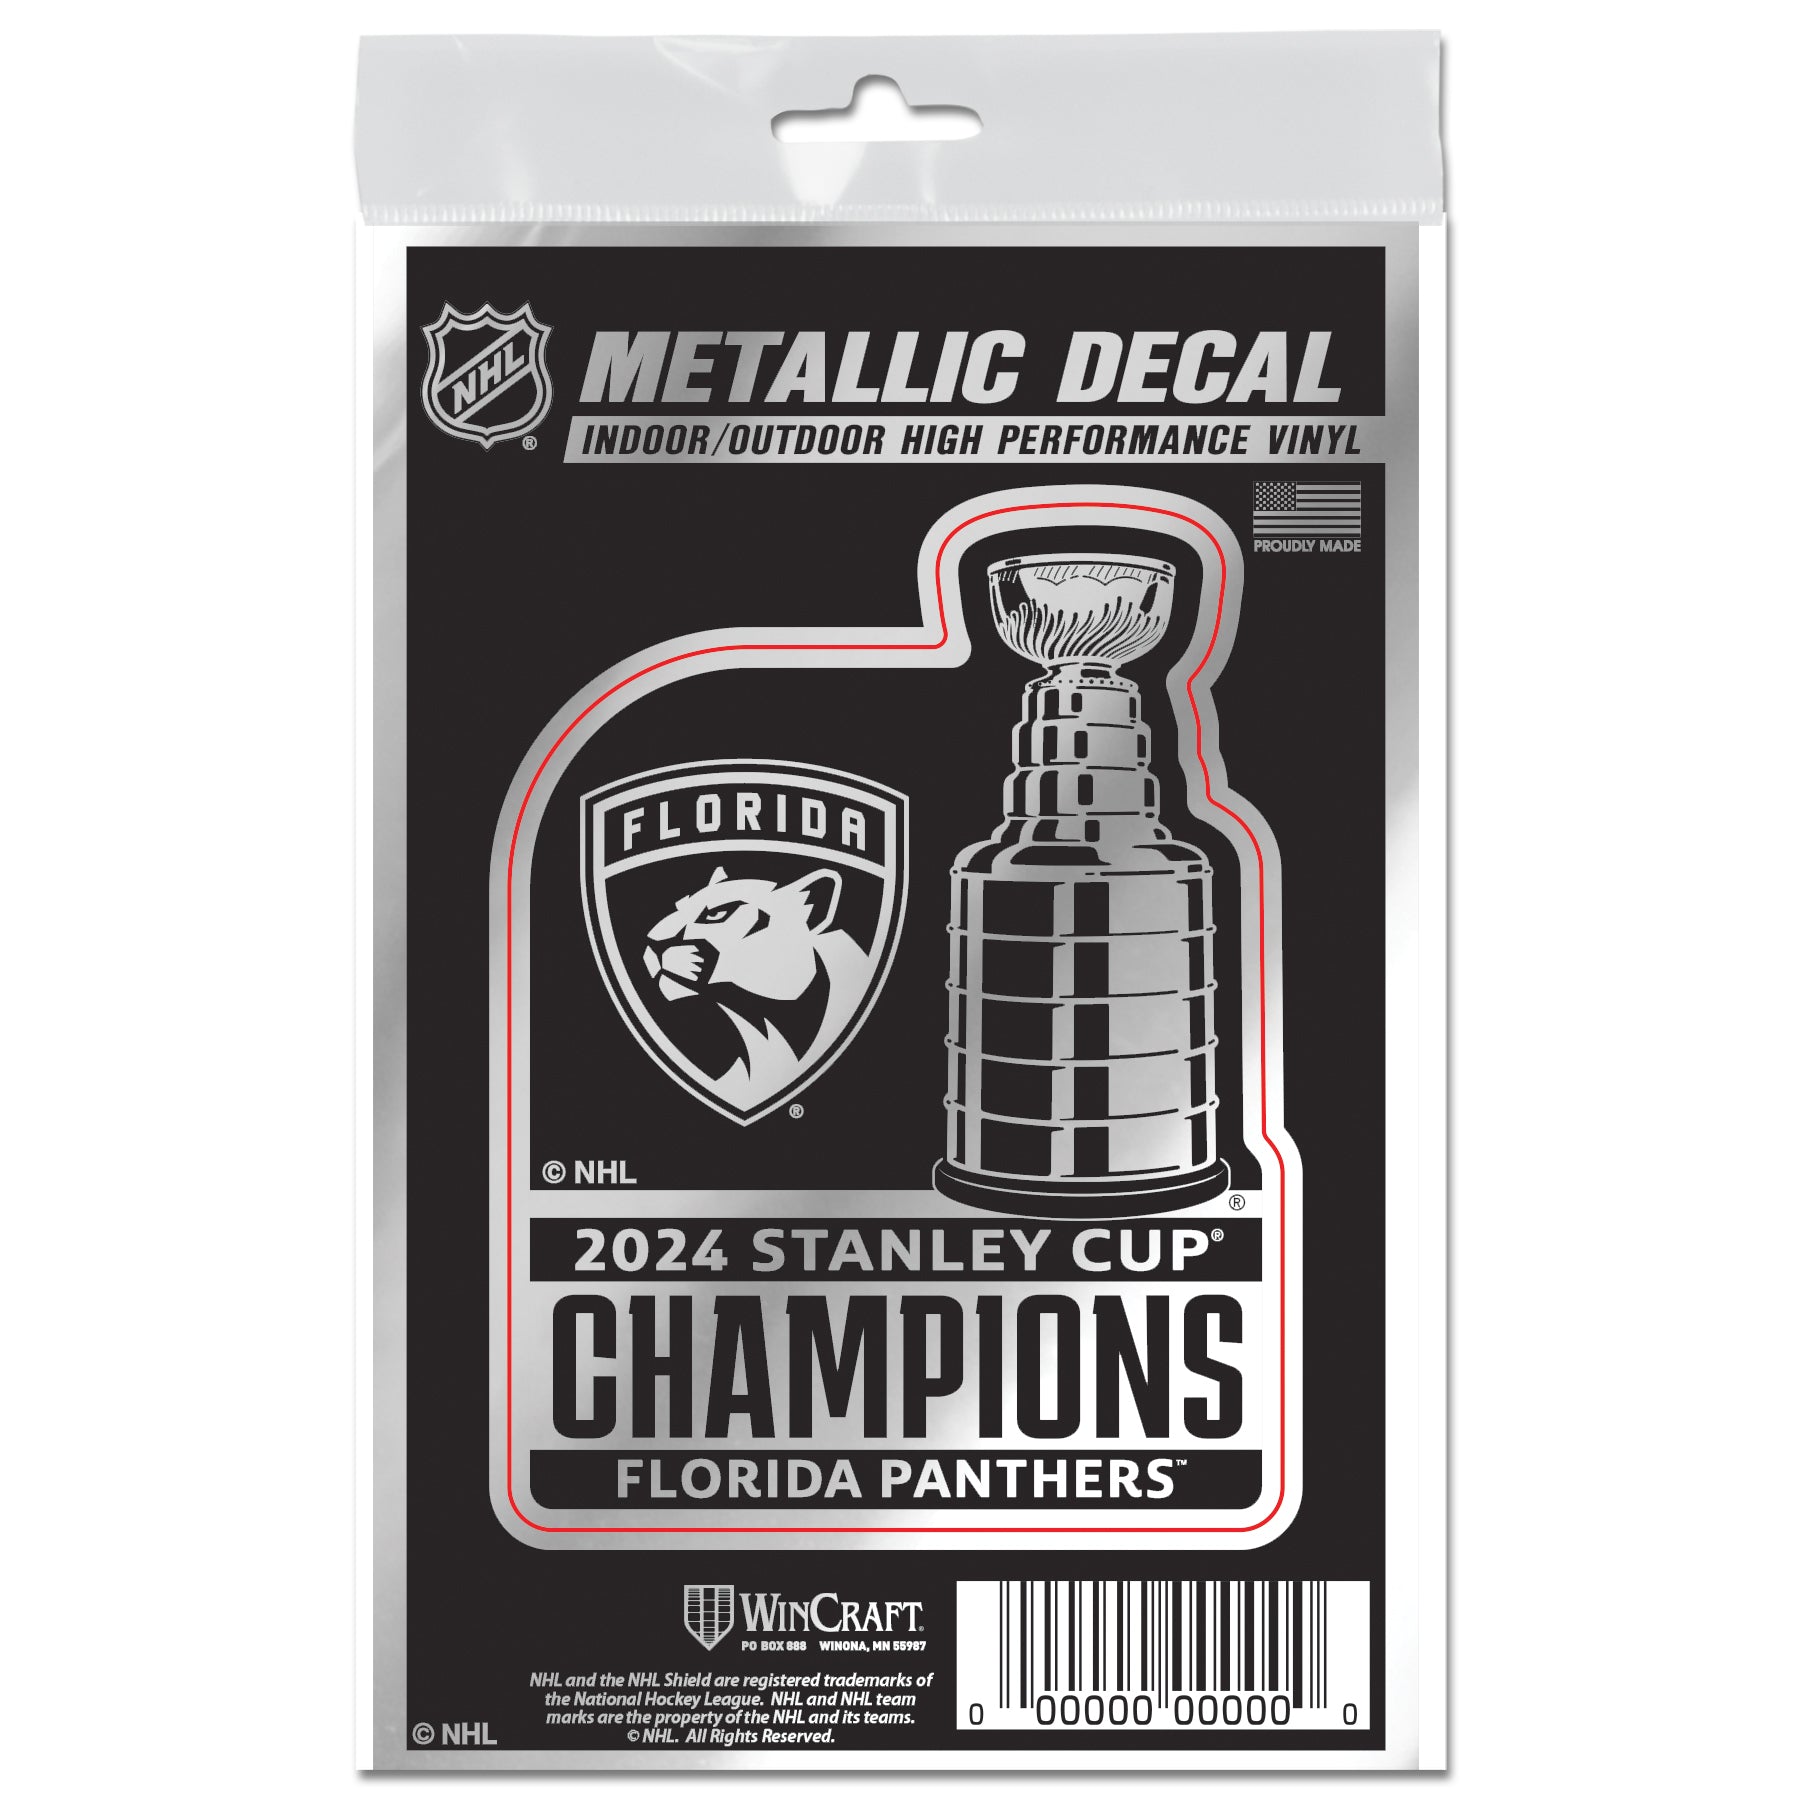 Florida Panthers 2024 Stanley Cup Champions Multi-Use Metallic Decal  - 3" x 5"